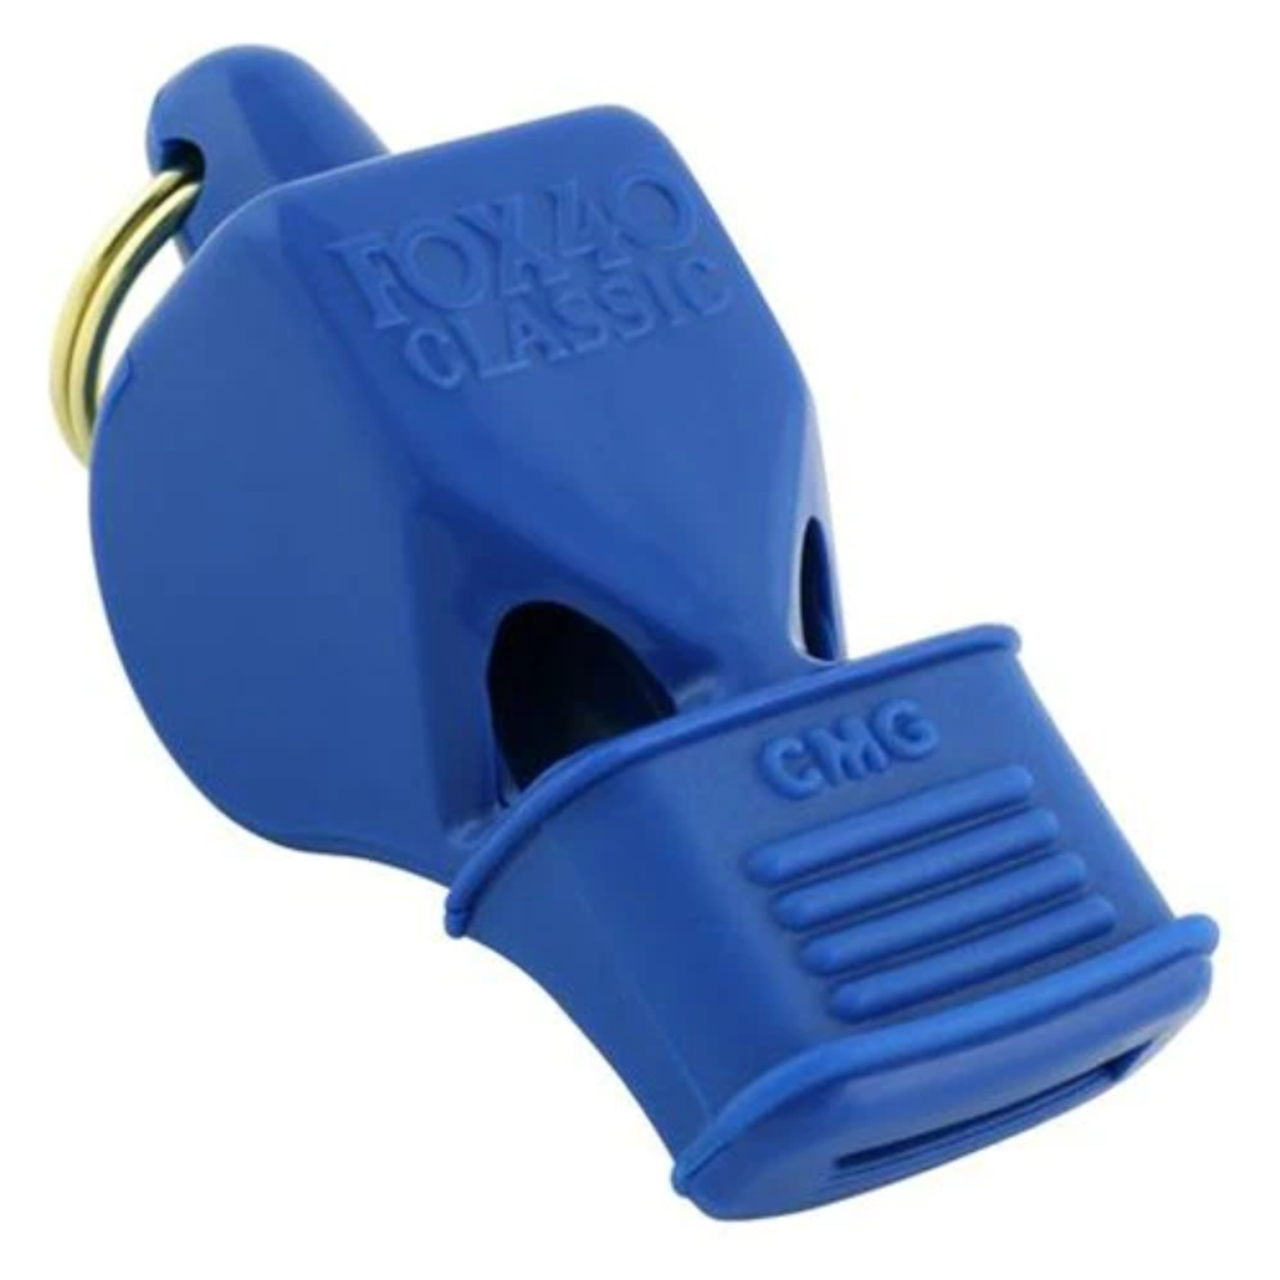 Fox 40 Classic CMG Whistle, Blue